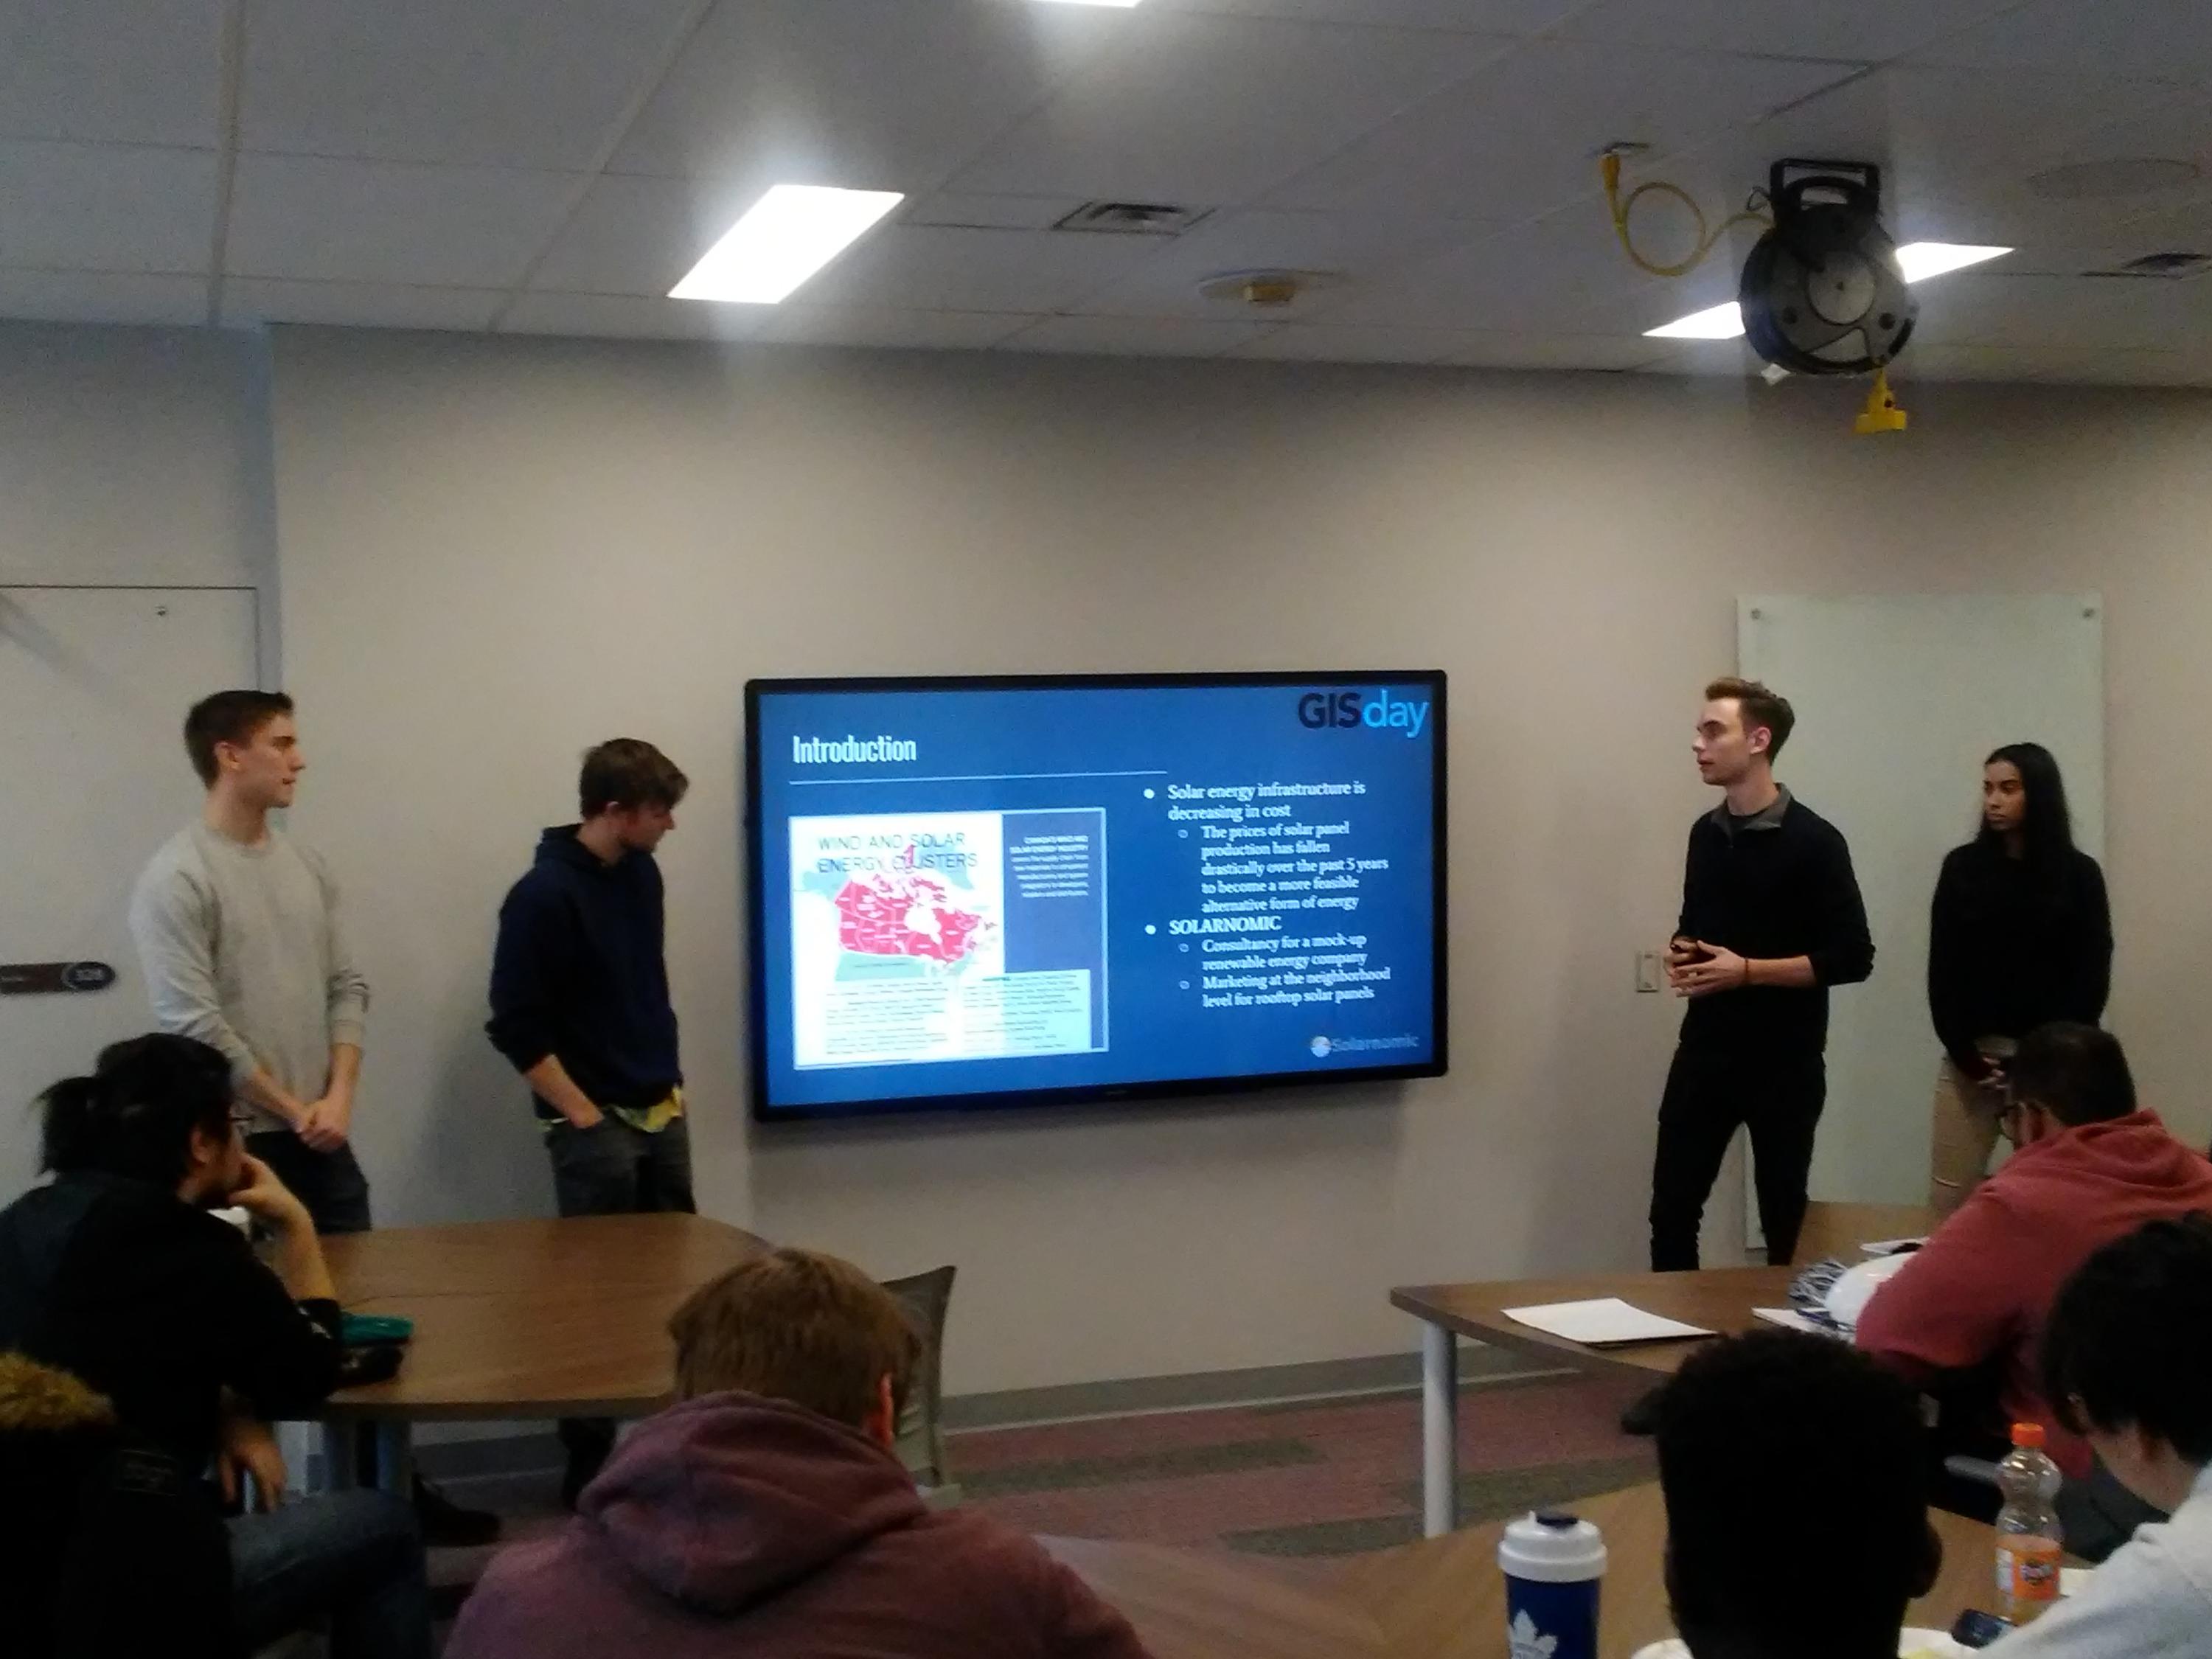 GP481 students presenting their project